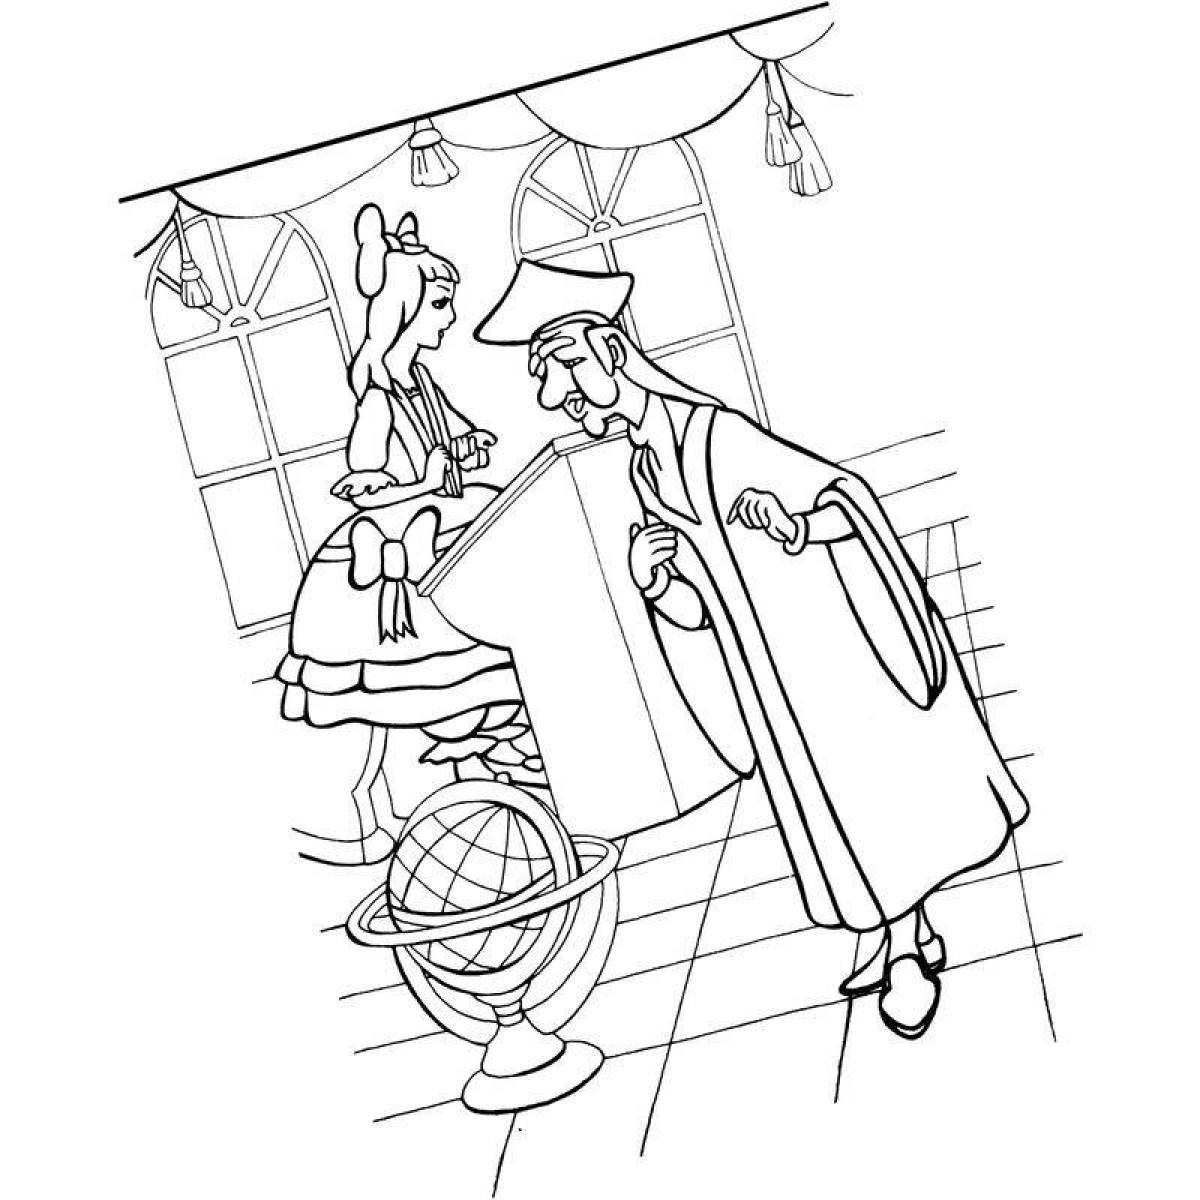 Amazing 12 months coloring pages